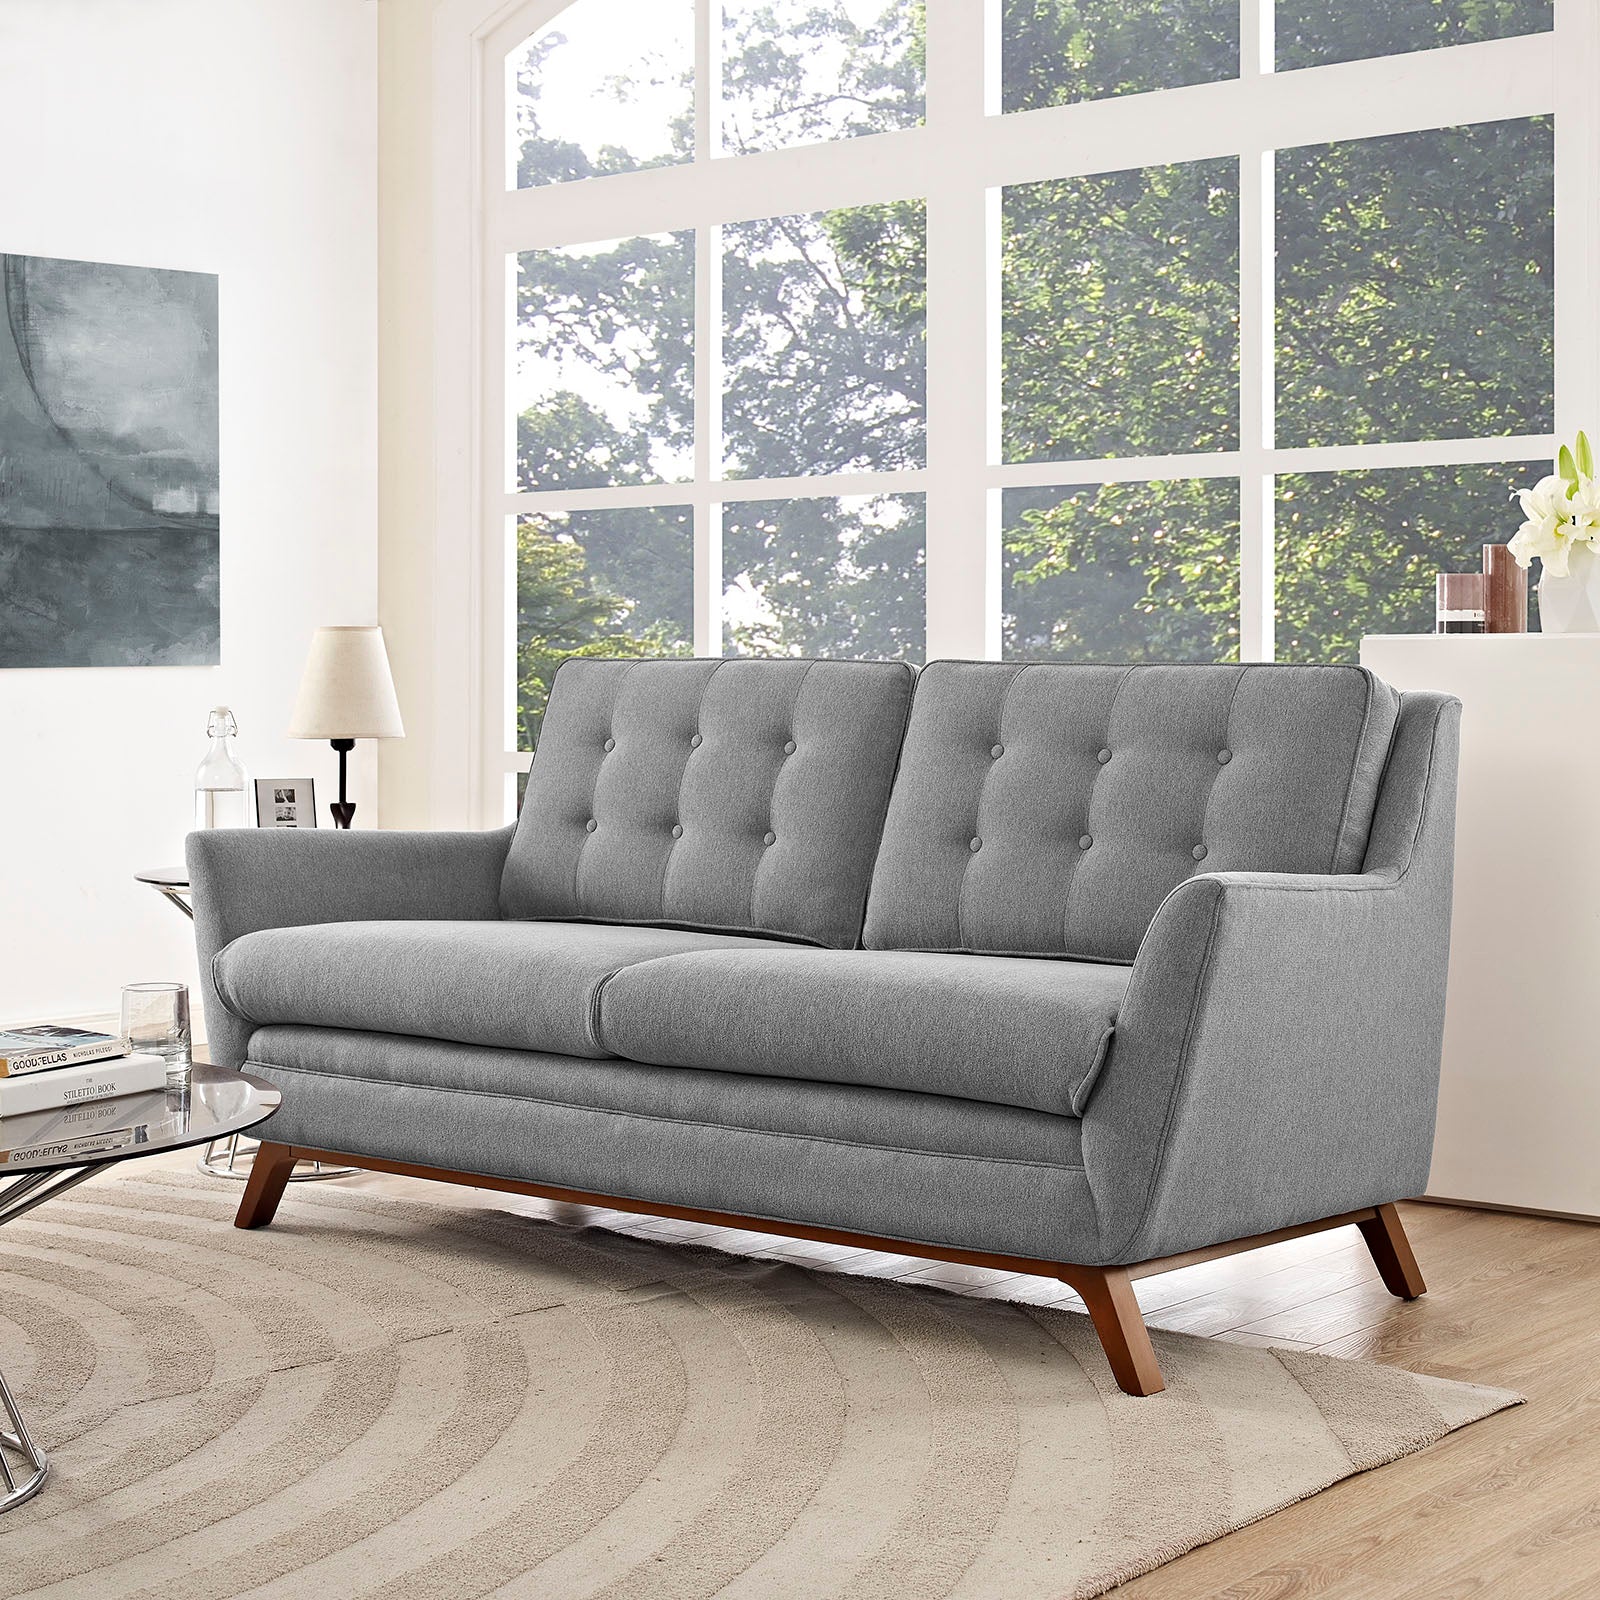 Modway Loveseats - Beguile Upholstered Fabric Loveseat Expectation Gray